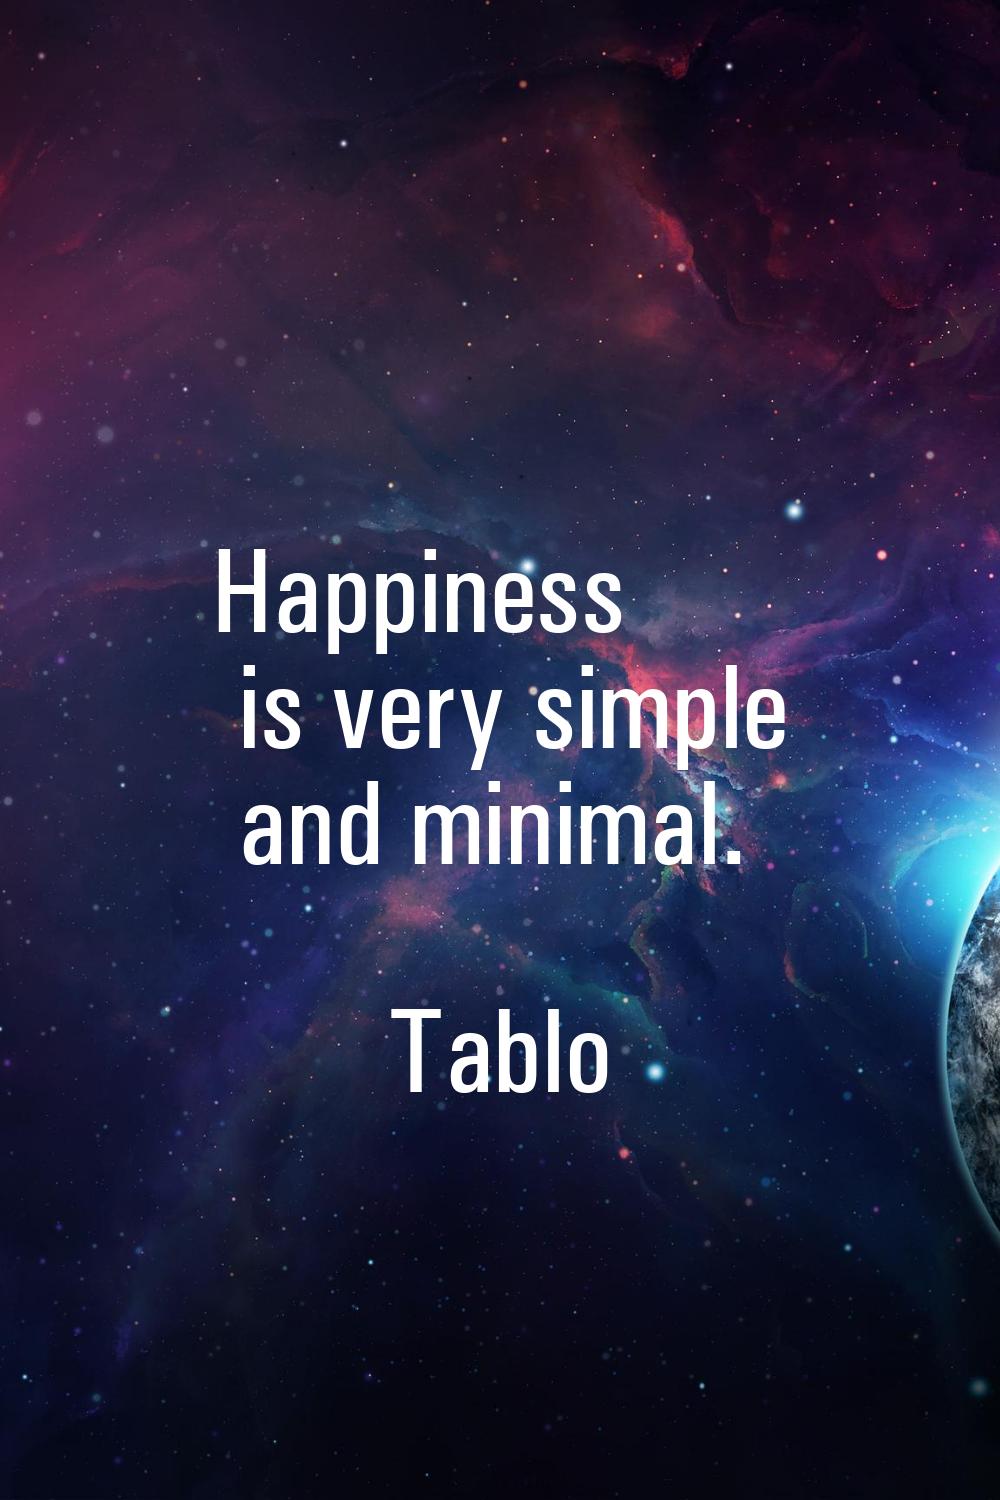 Happiness is very simple and minimal.